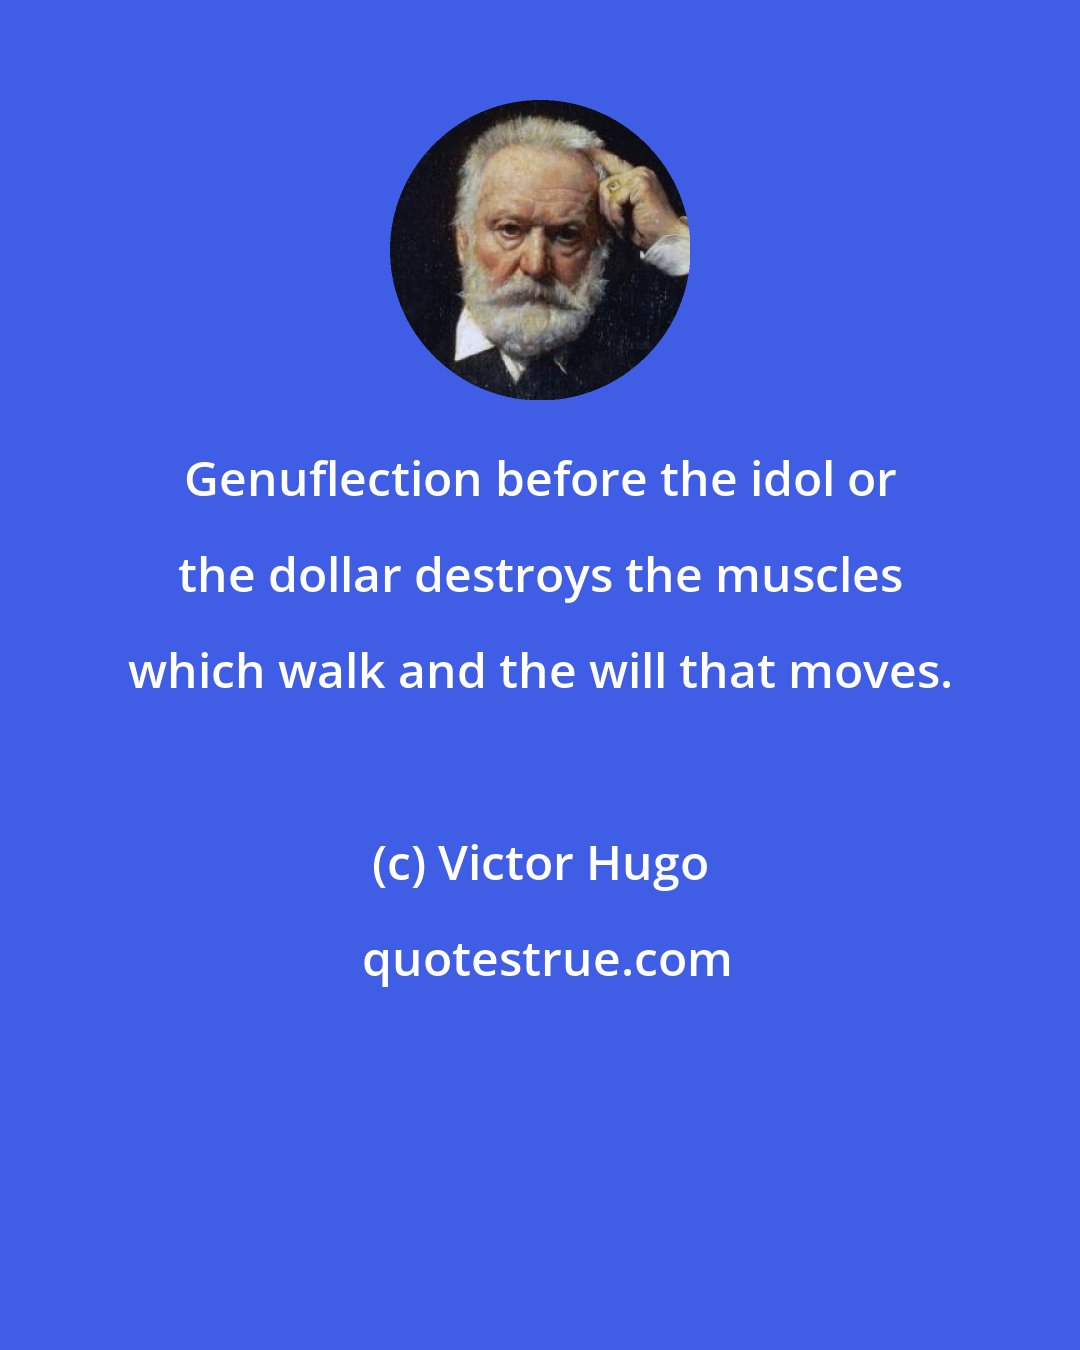 Victor Hugo: Genuflection before the idol or the dollar destroys the muscles which walk and the will that moves.